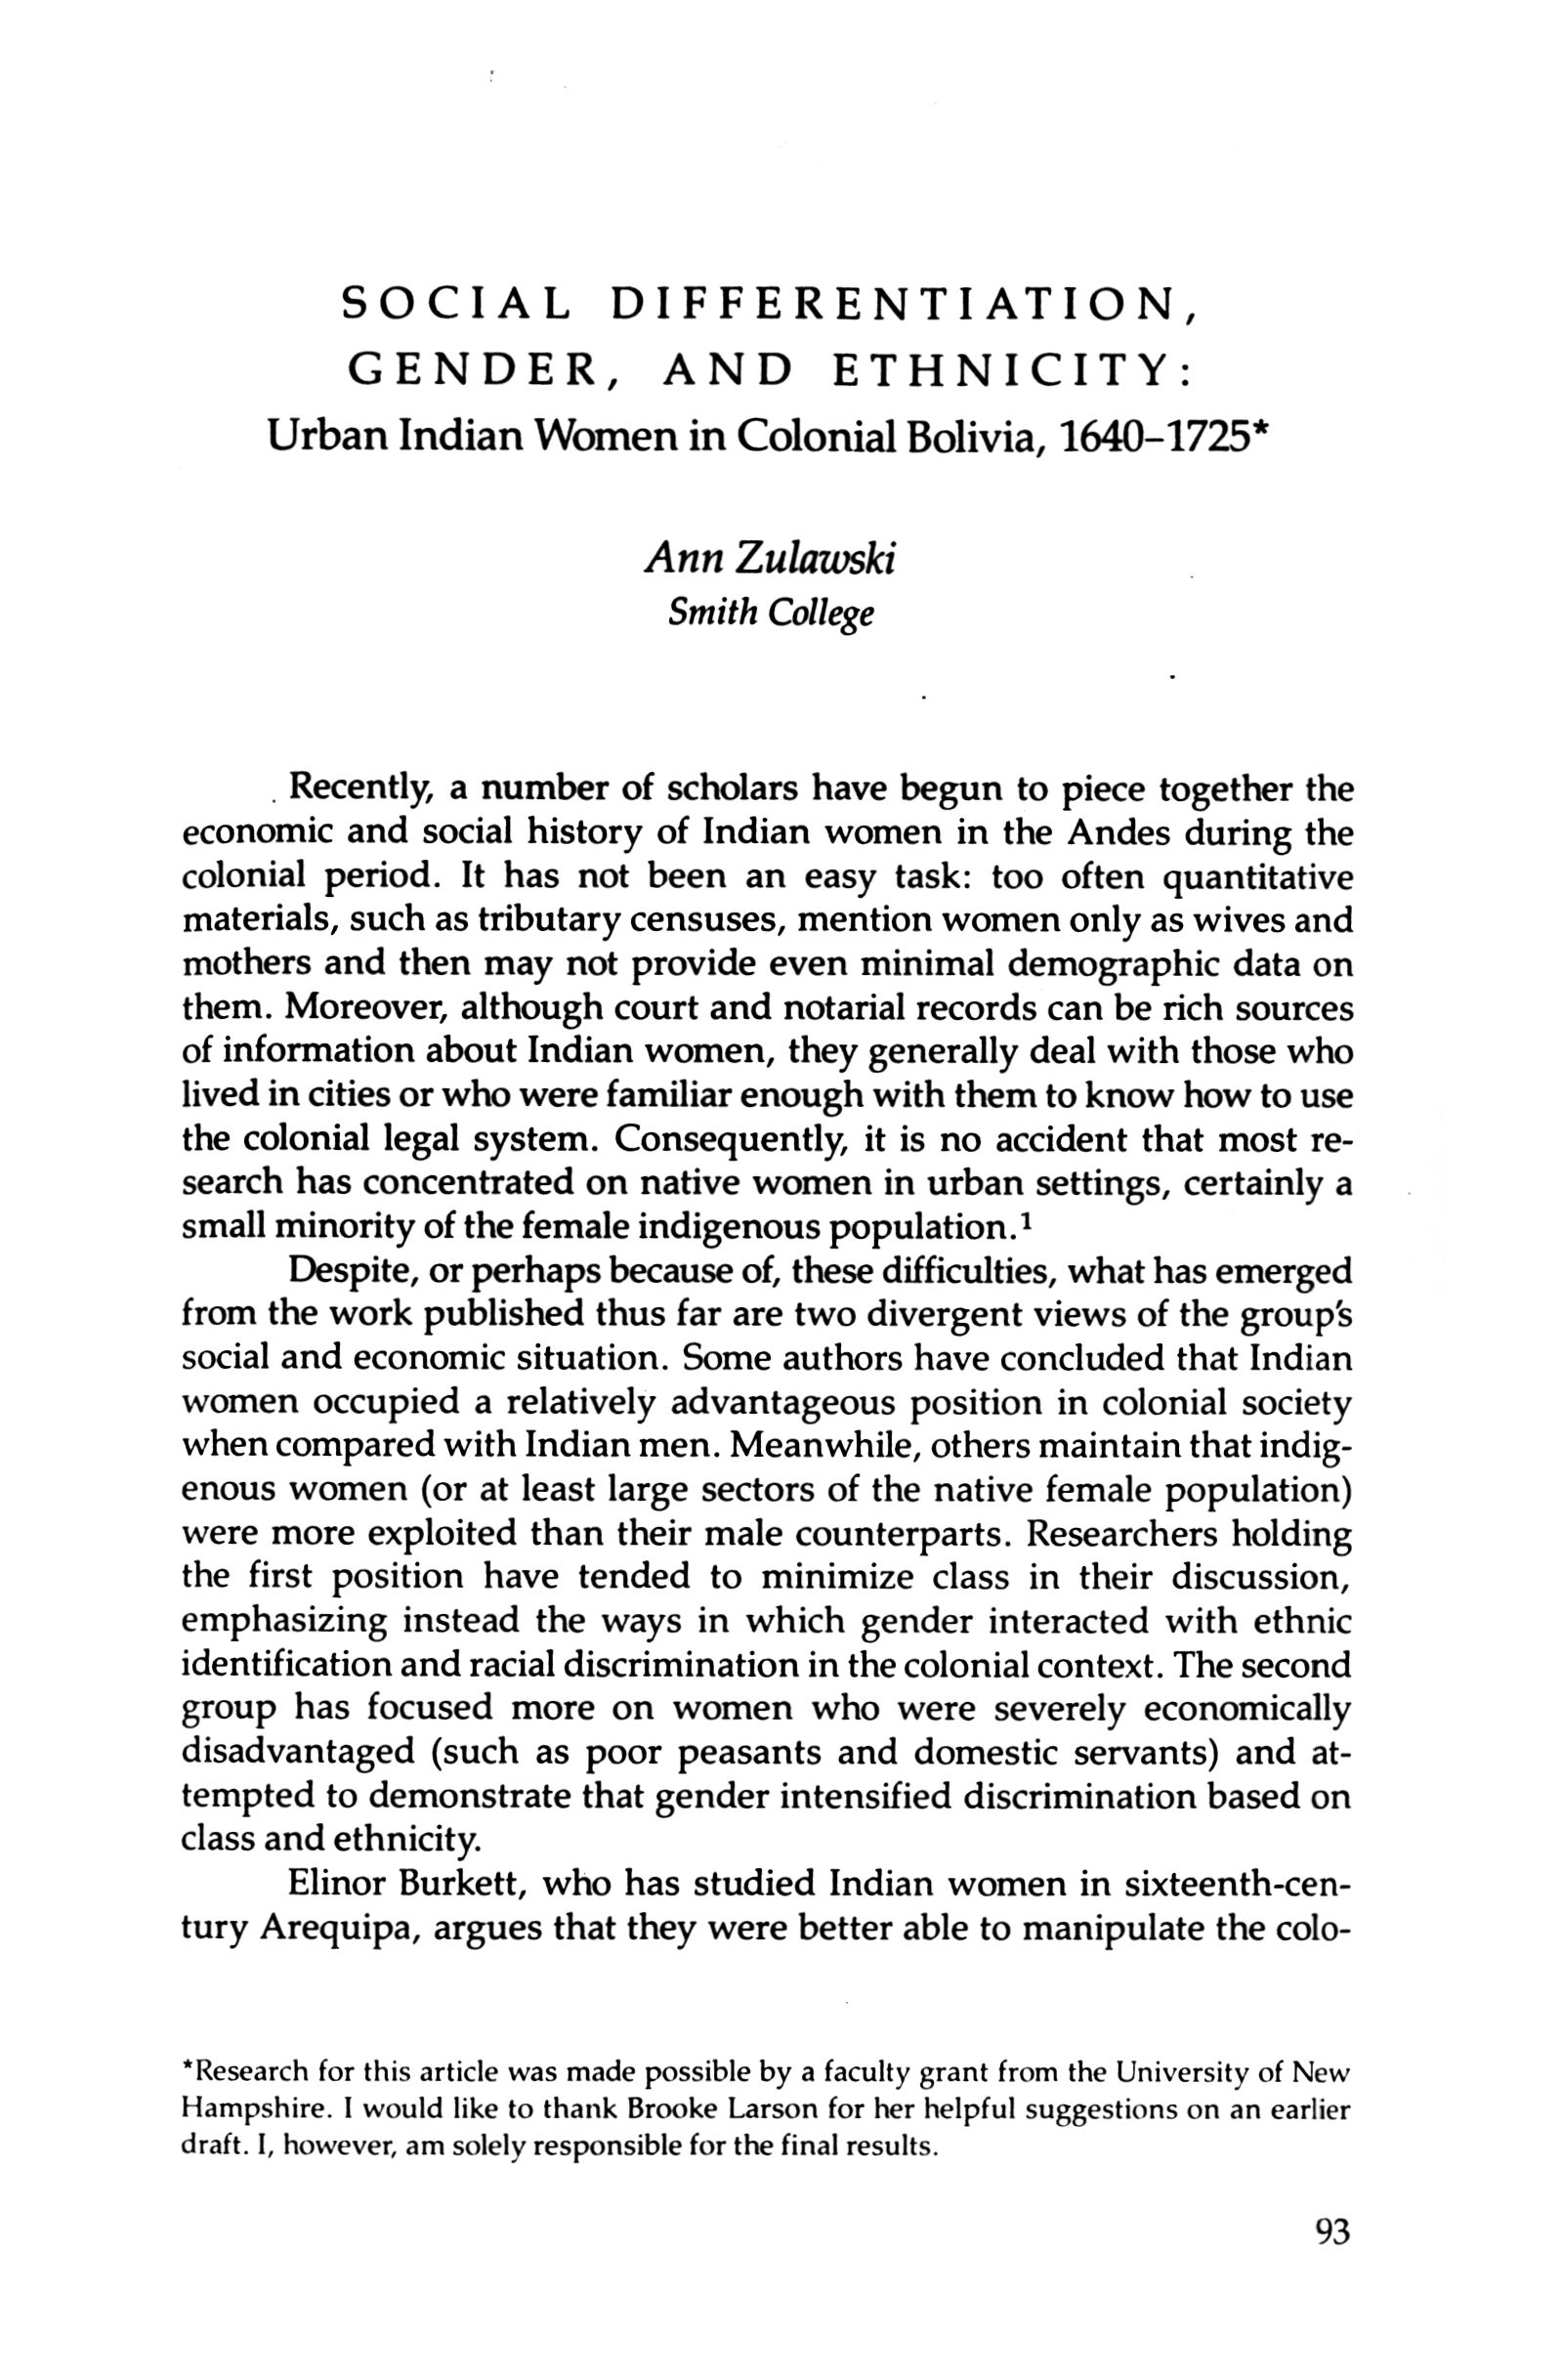 Social Differentiation, Gender, and Ethnicity : urban Indian Women in Colonial Bolivia, 1640-1725 /